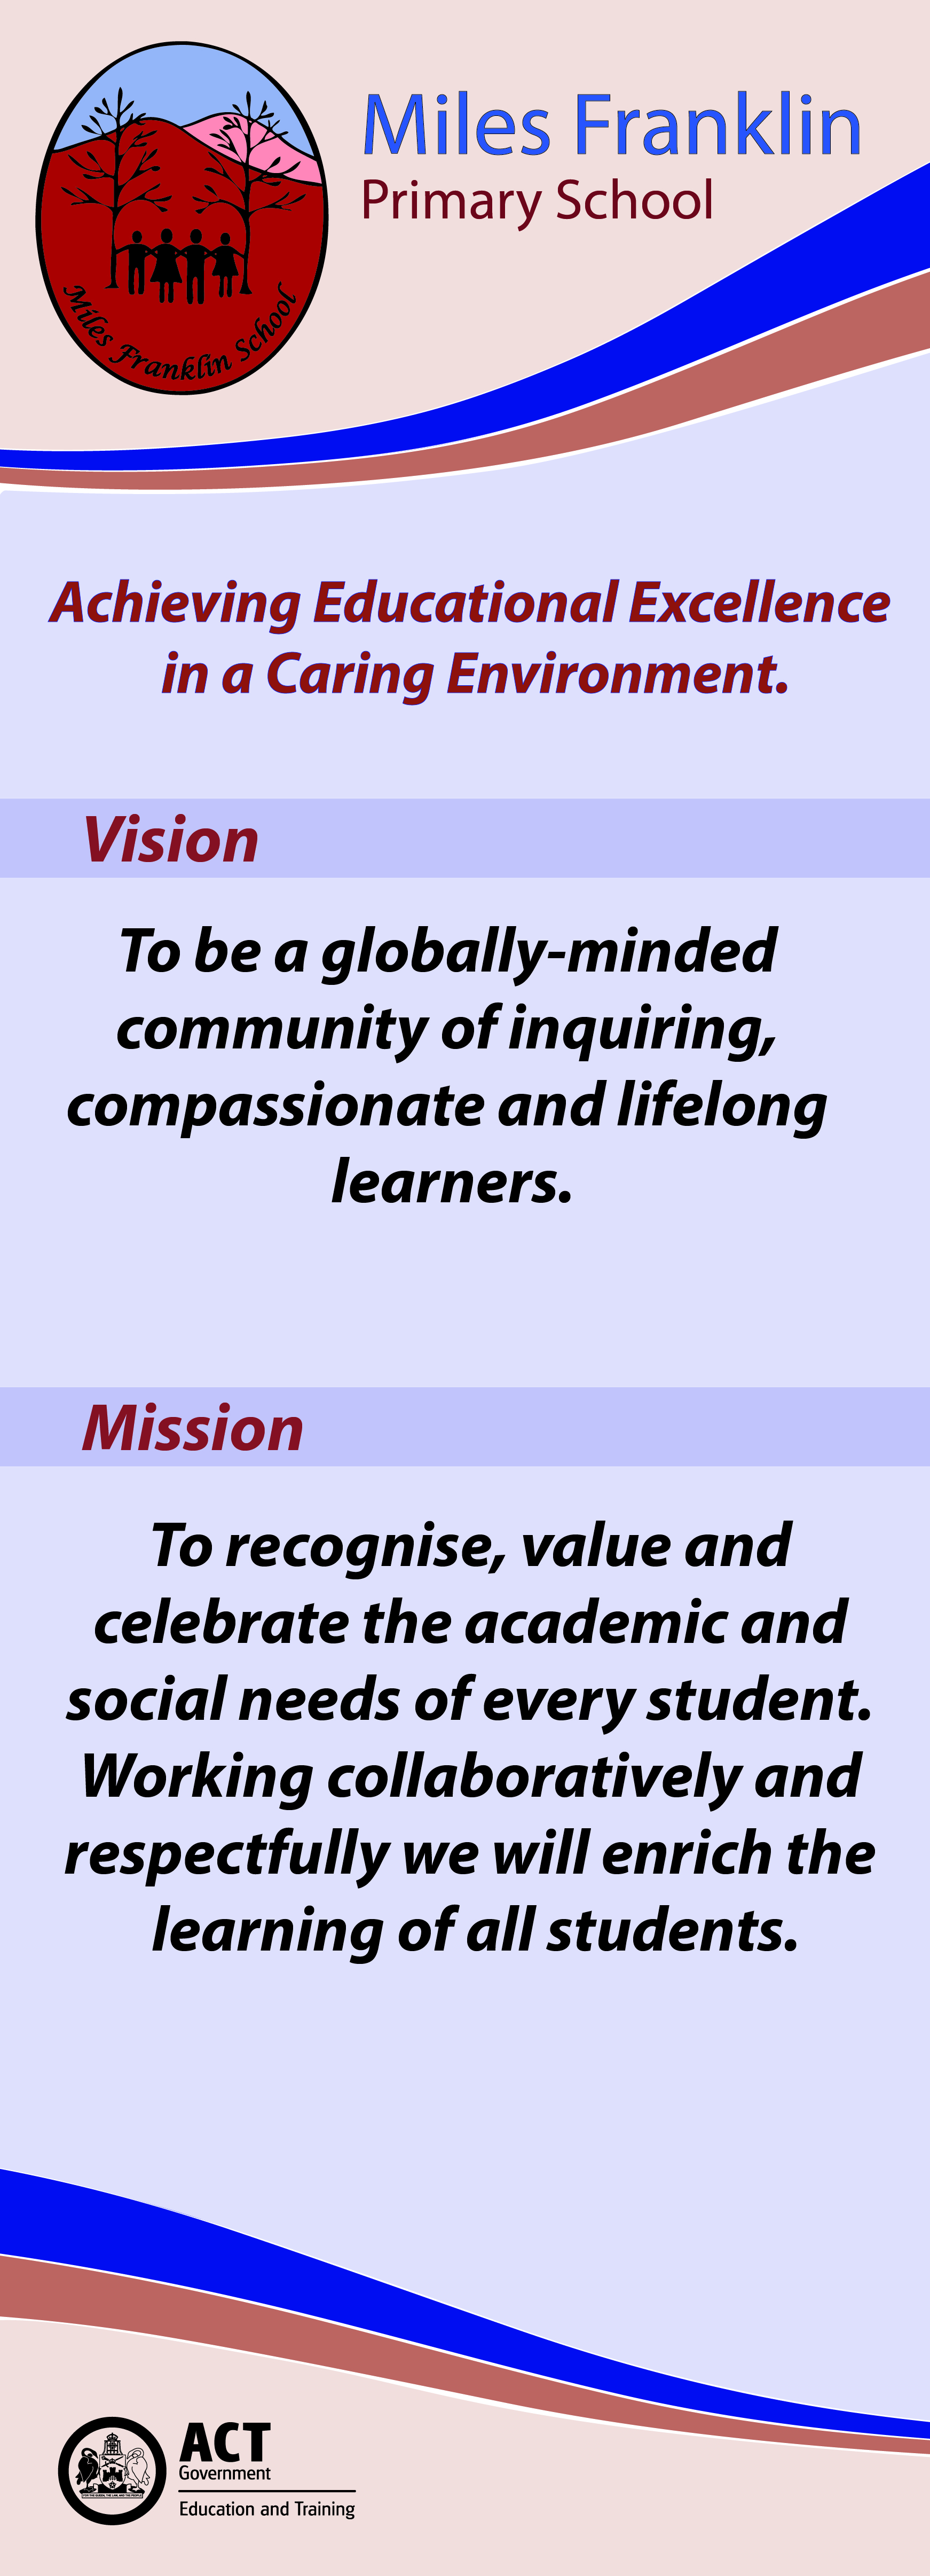 Mission and Value